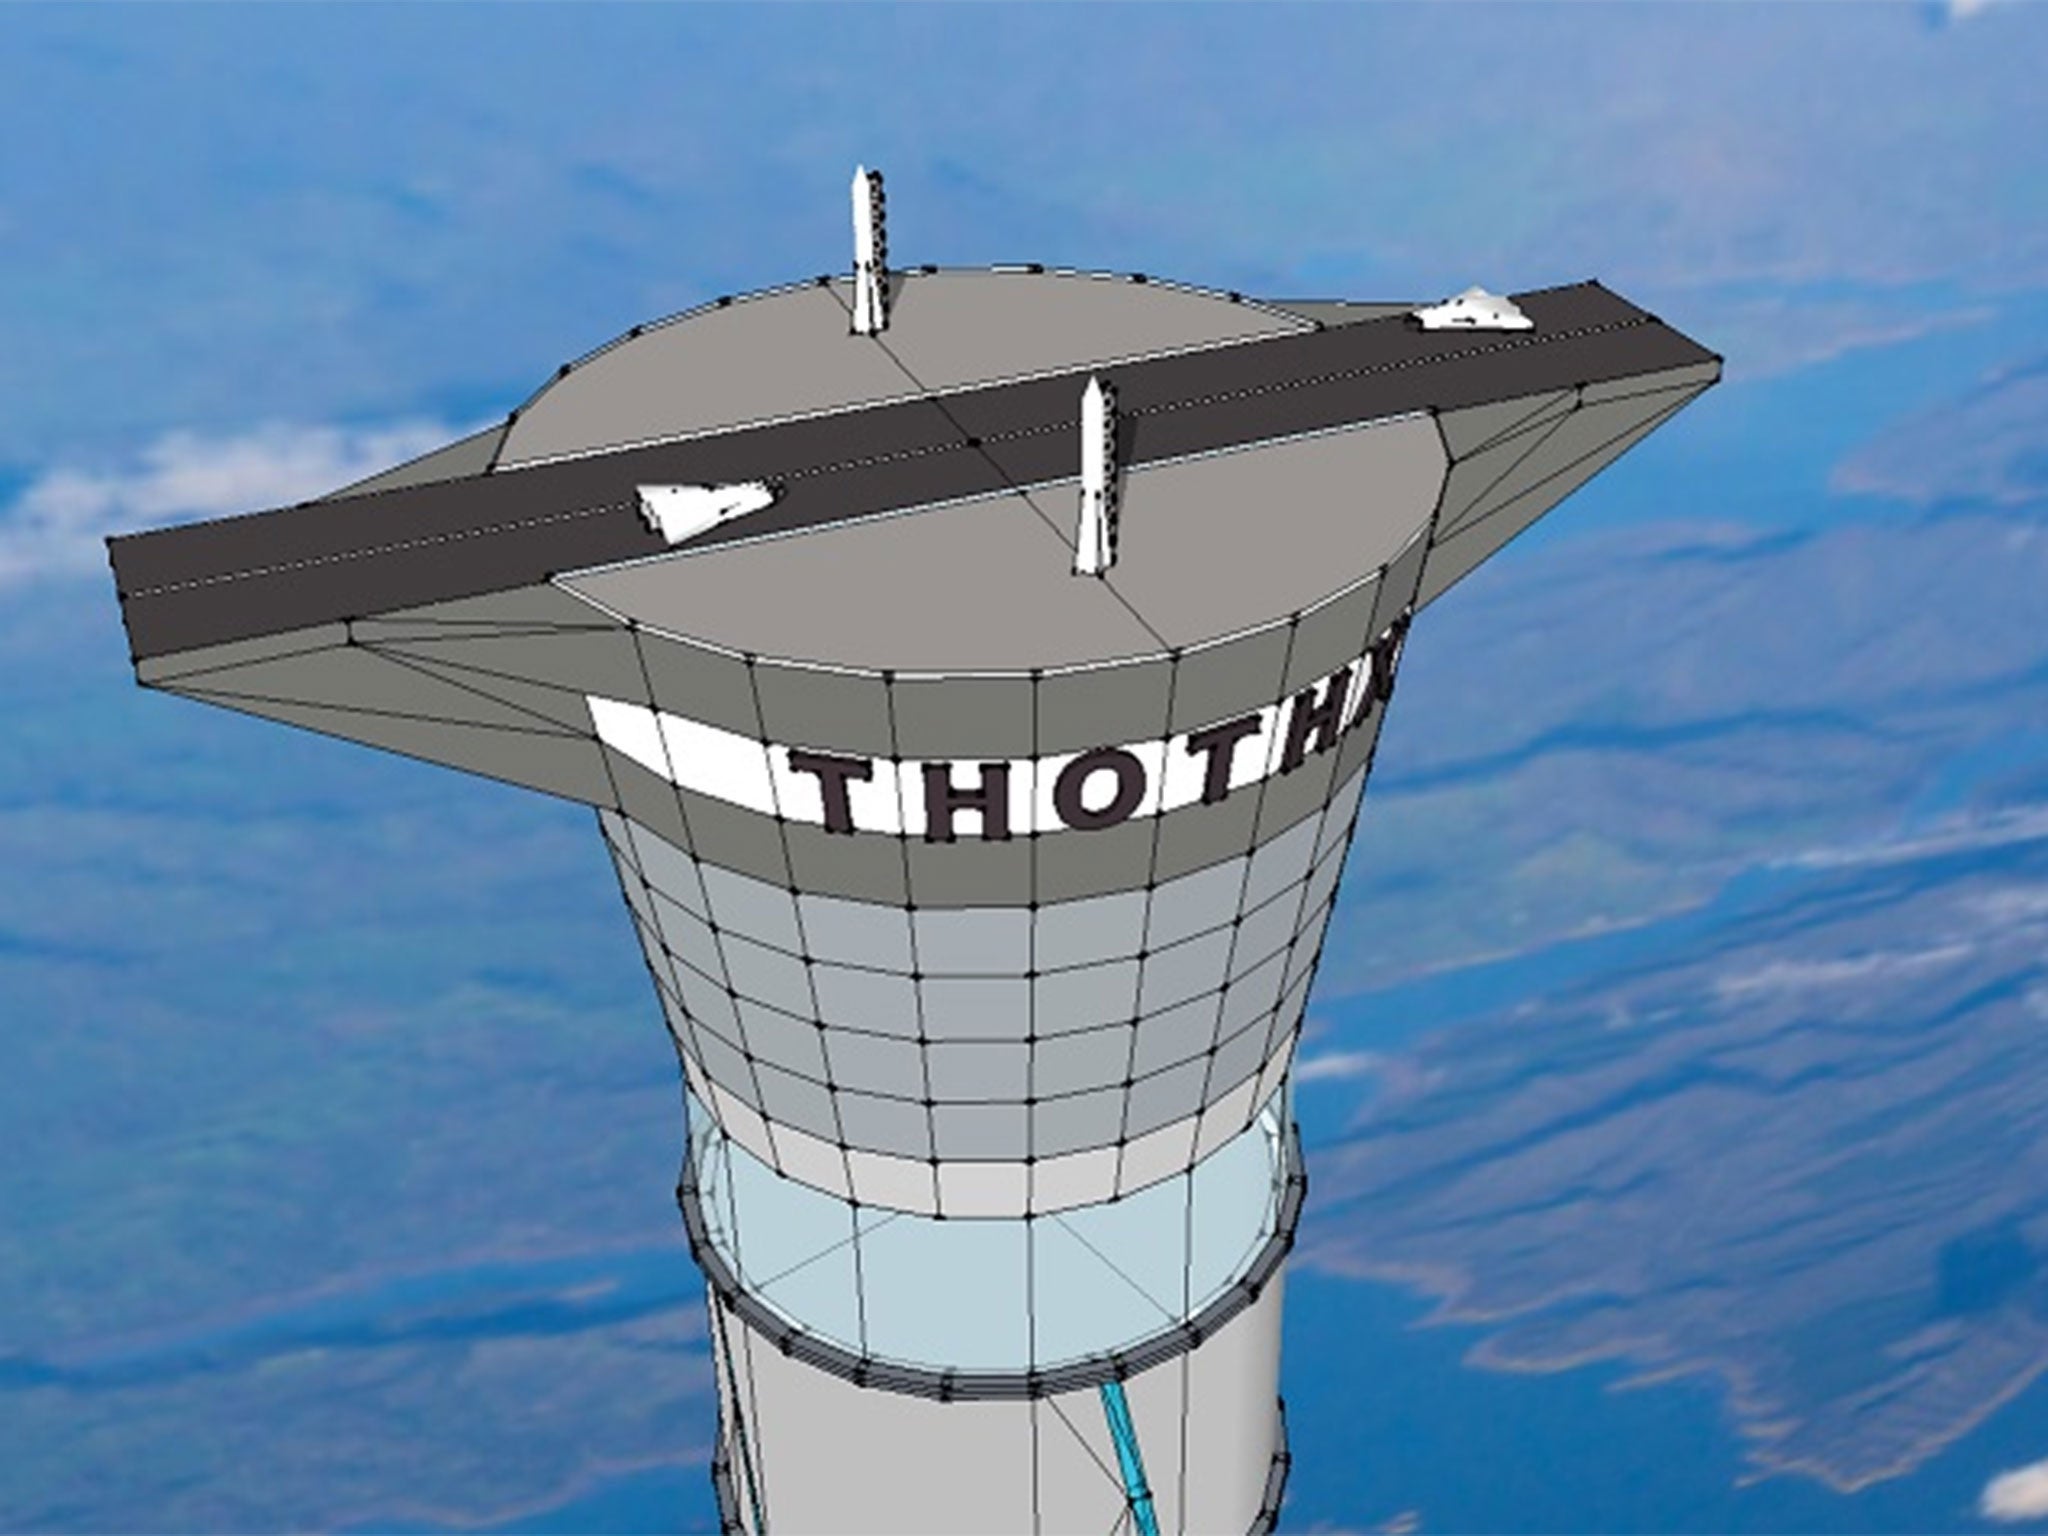 Canadian space company Thoth Technology said the 20km tower would make flying to outer space like 'taking a passenger jet' (Thoth)